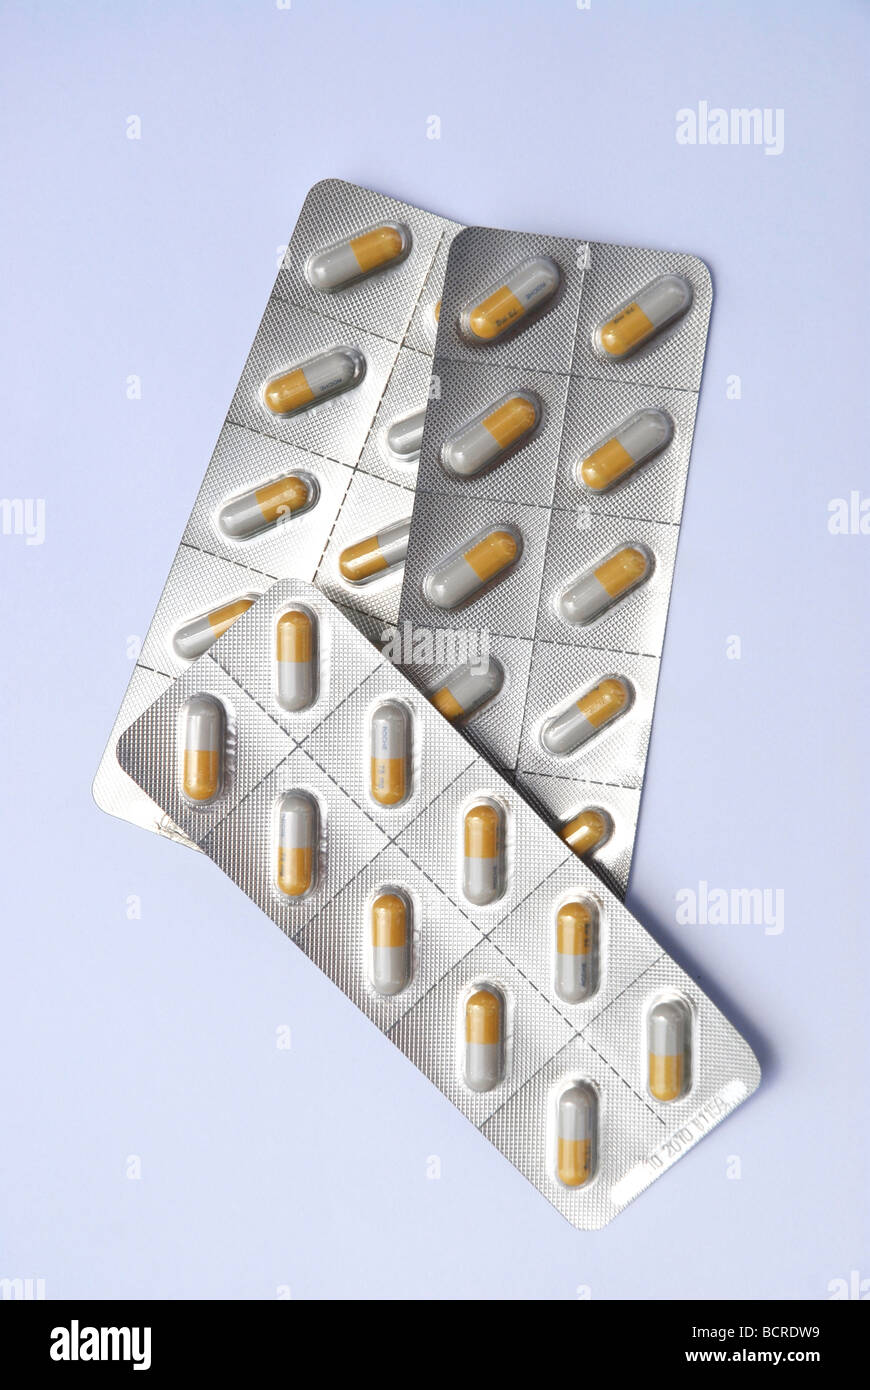 genuineTamiflu 75mg, an anti-viral drug used in the treatment and prophylaxisof Influenzavirus A and Influenzavirus B infection Stock Photo